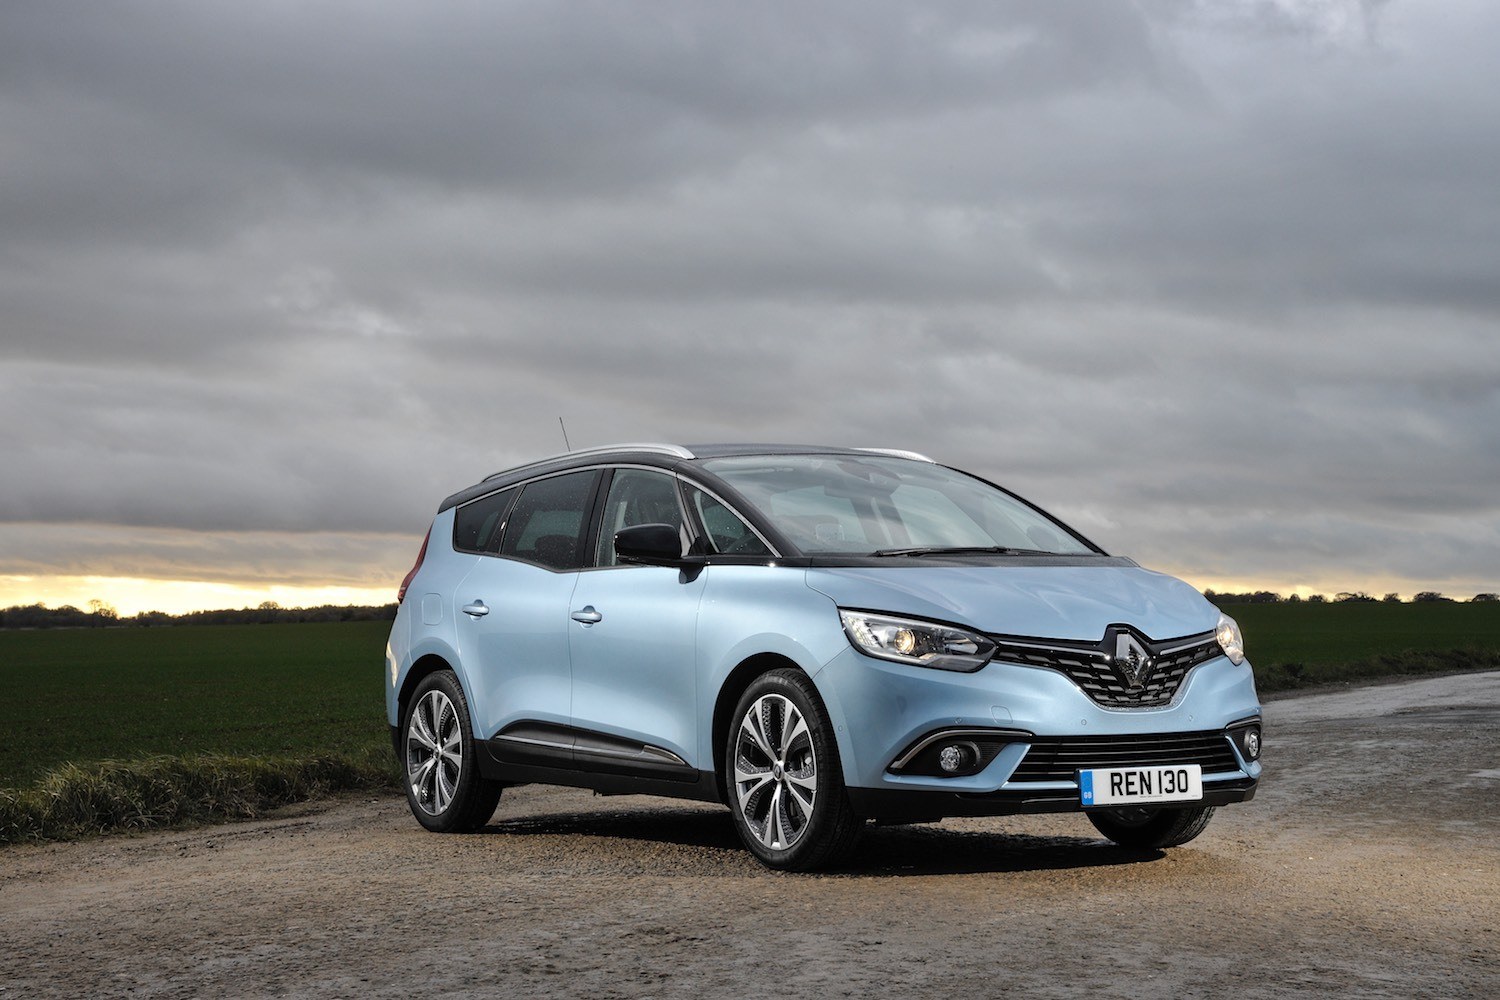 Neil Lyndon reviews the lates Renault Scenic for Drive 20